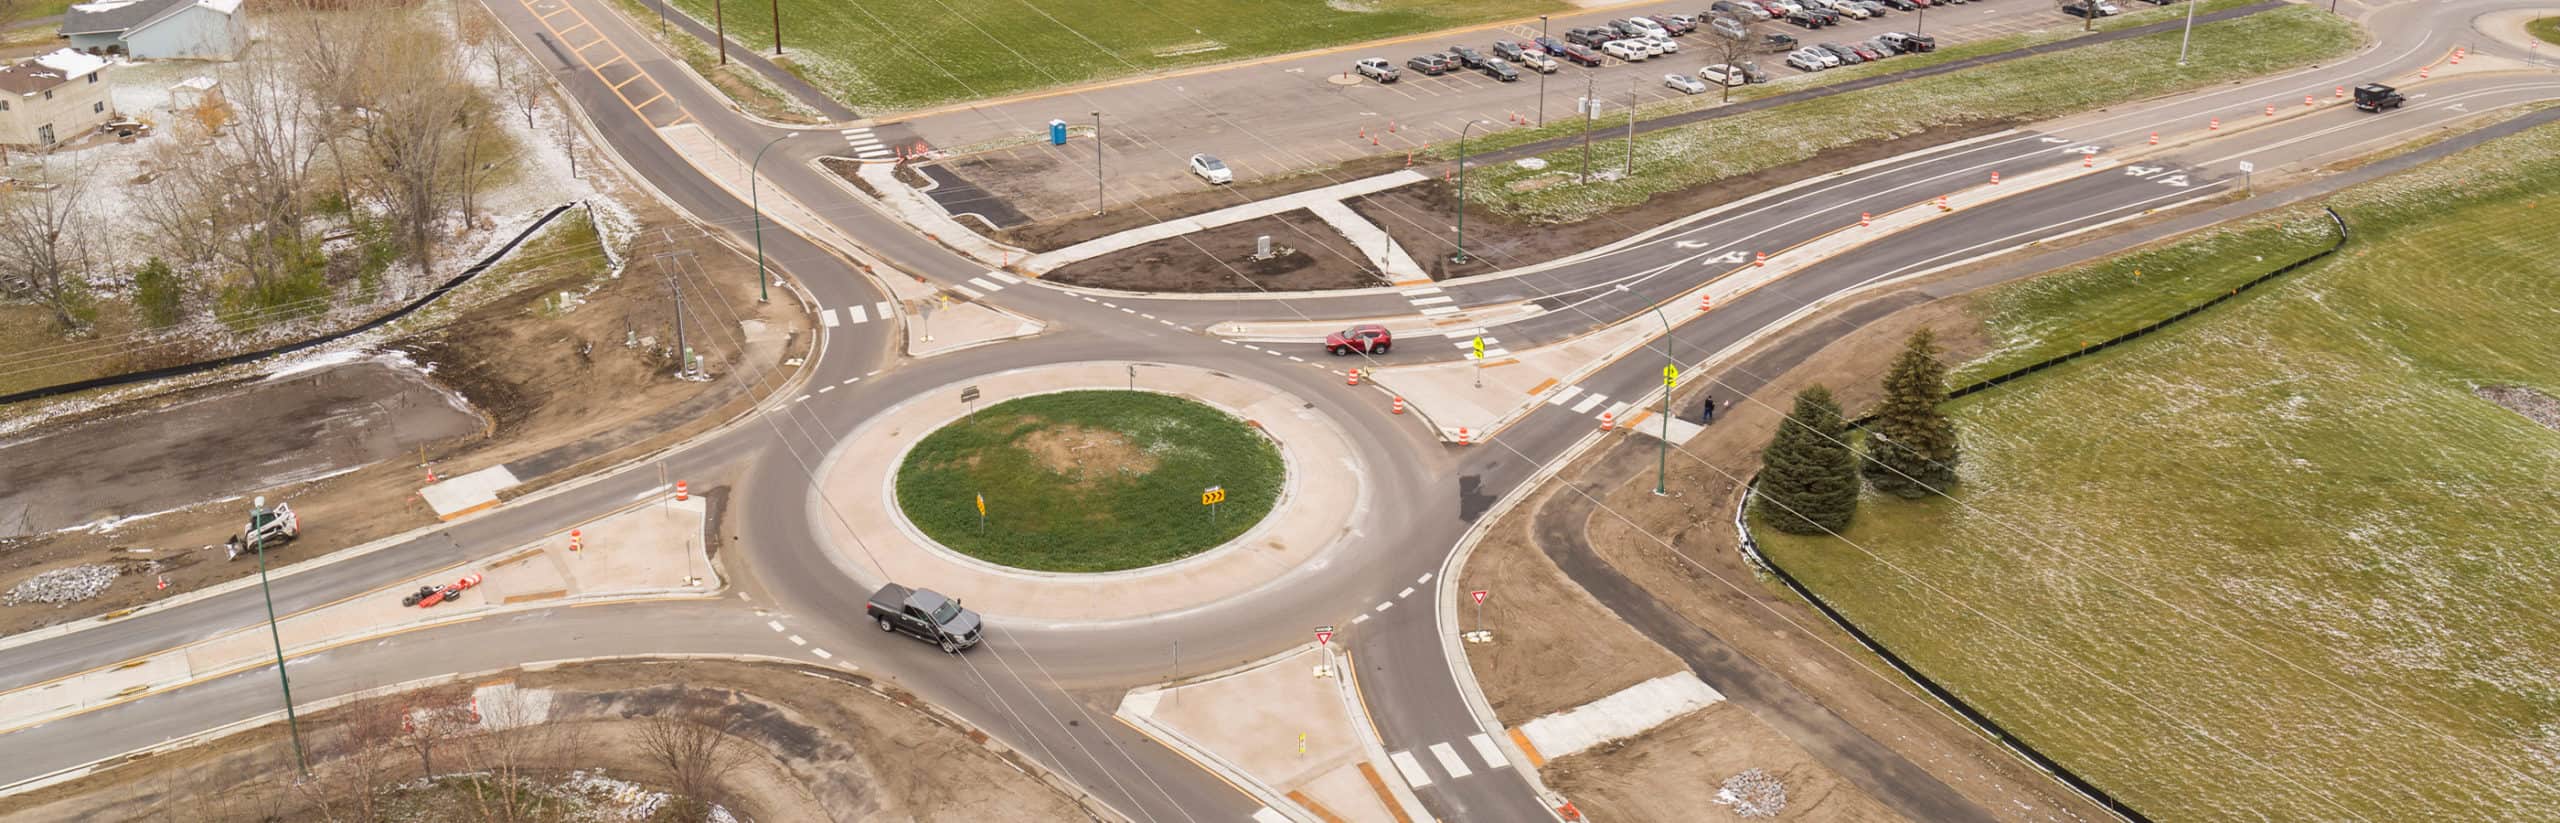 Bird's eye view of roundabout in Monticello, MN.